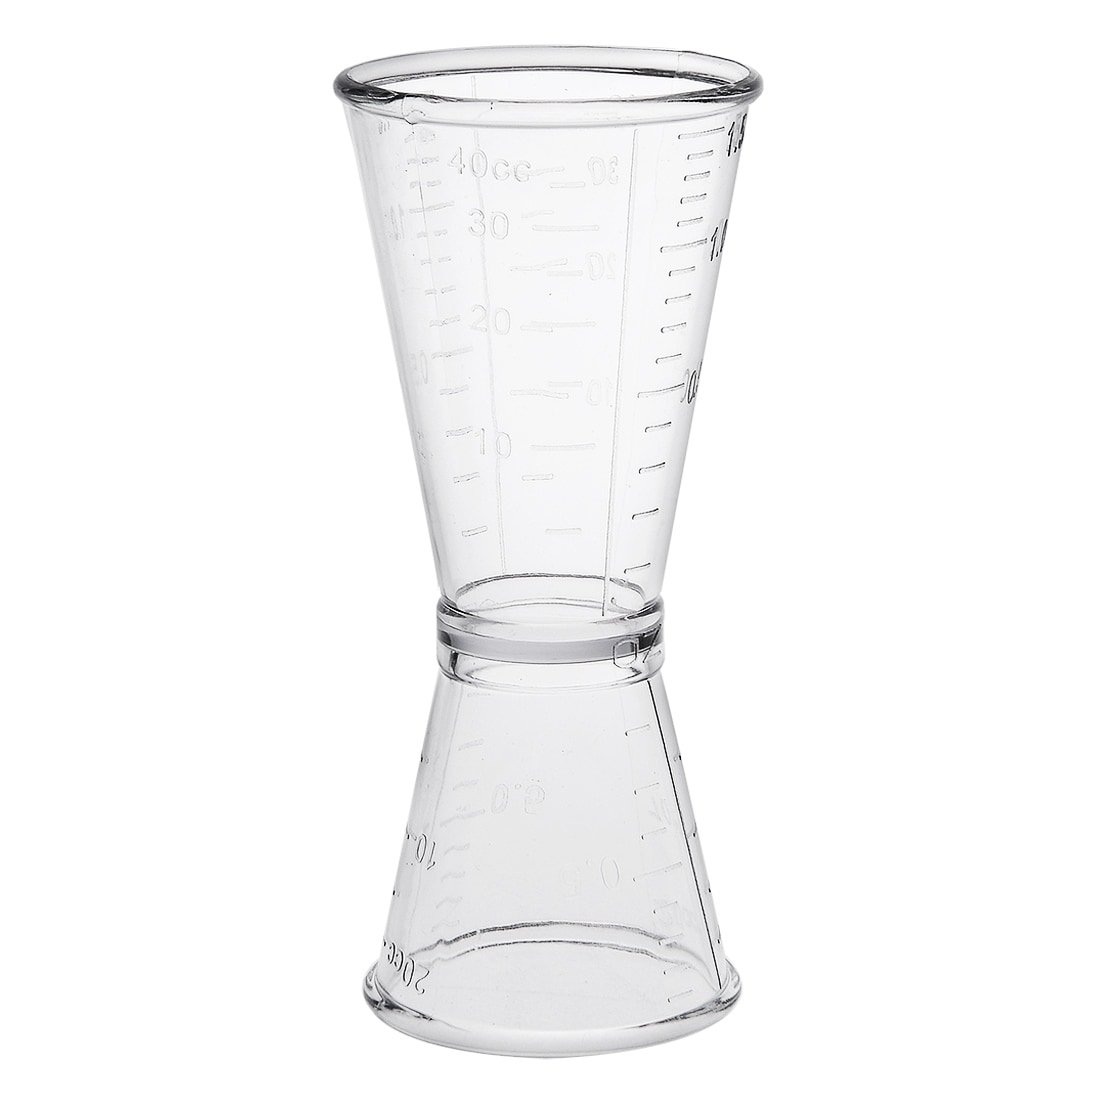 https://ak1.ostkcdn.com/images/products/is/images/direct/9d7f97905c173dc6f144a9ff42e0a8d3f09c473b/Double-Clear-Plastic-Measure-Cup-for-Party-Kitchen-Tool-40ml-20ml.jpg